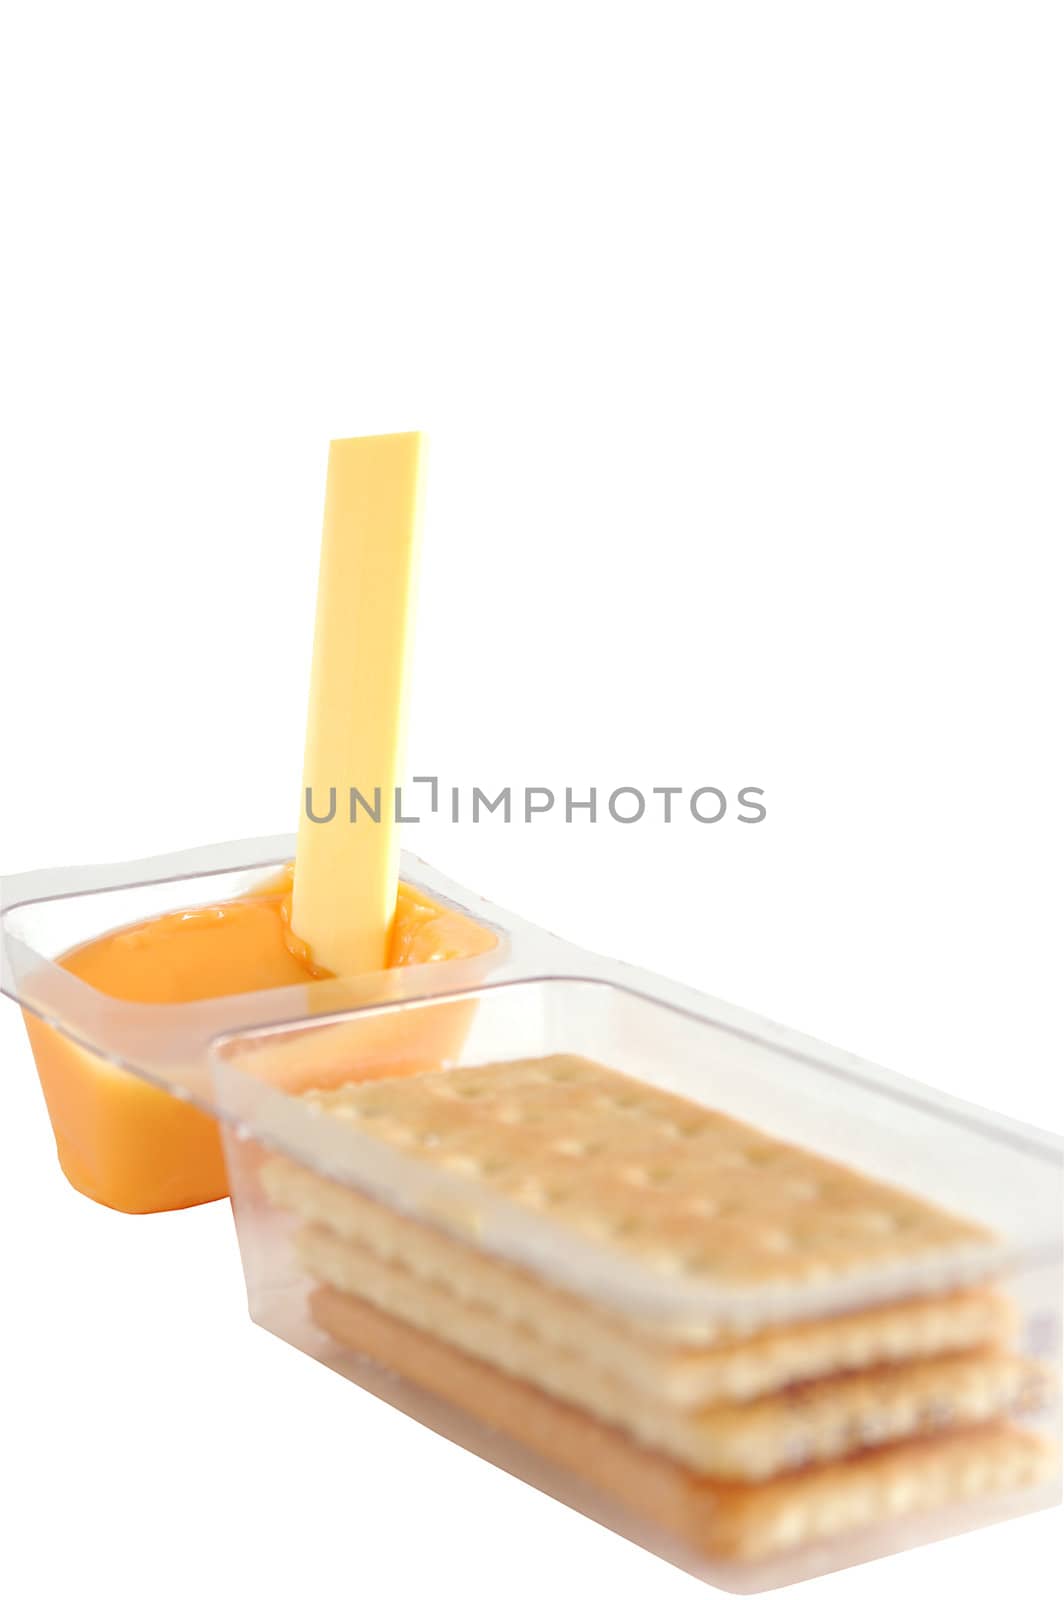 crackers and cheese dip by zenpix